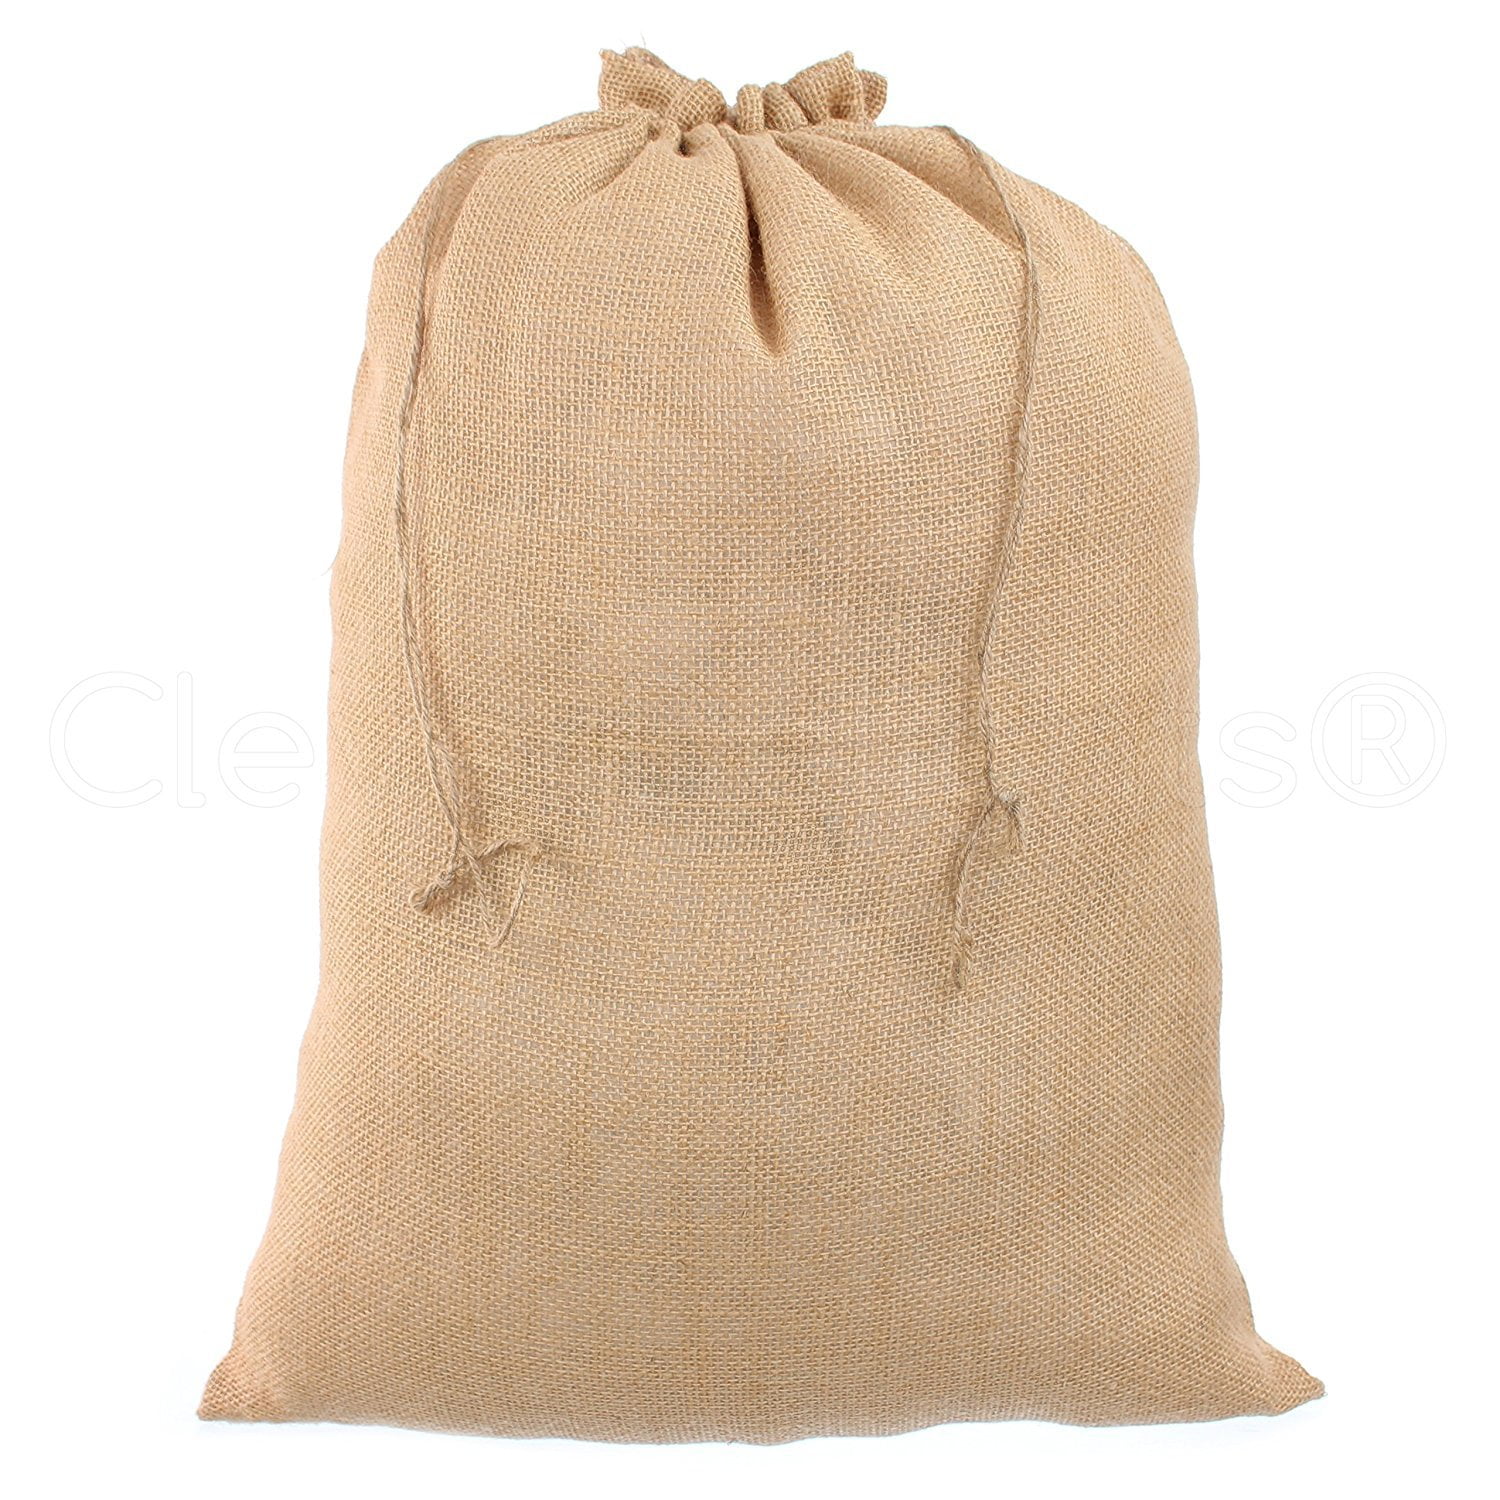 6" x 10" 50 Red Burlap Bags with Jute Drawstring Christmas Holiday Sack 